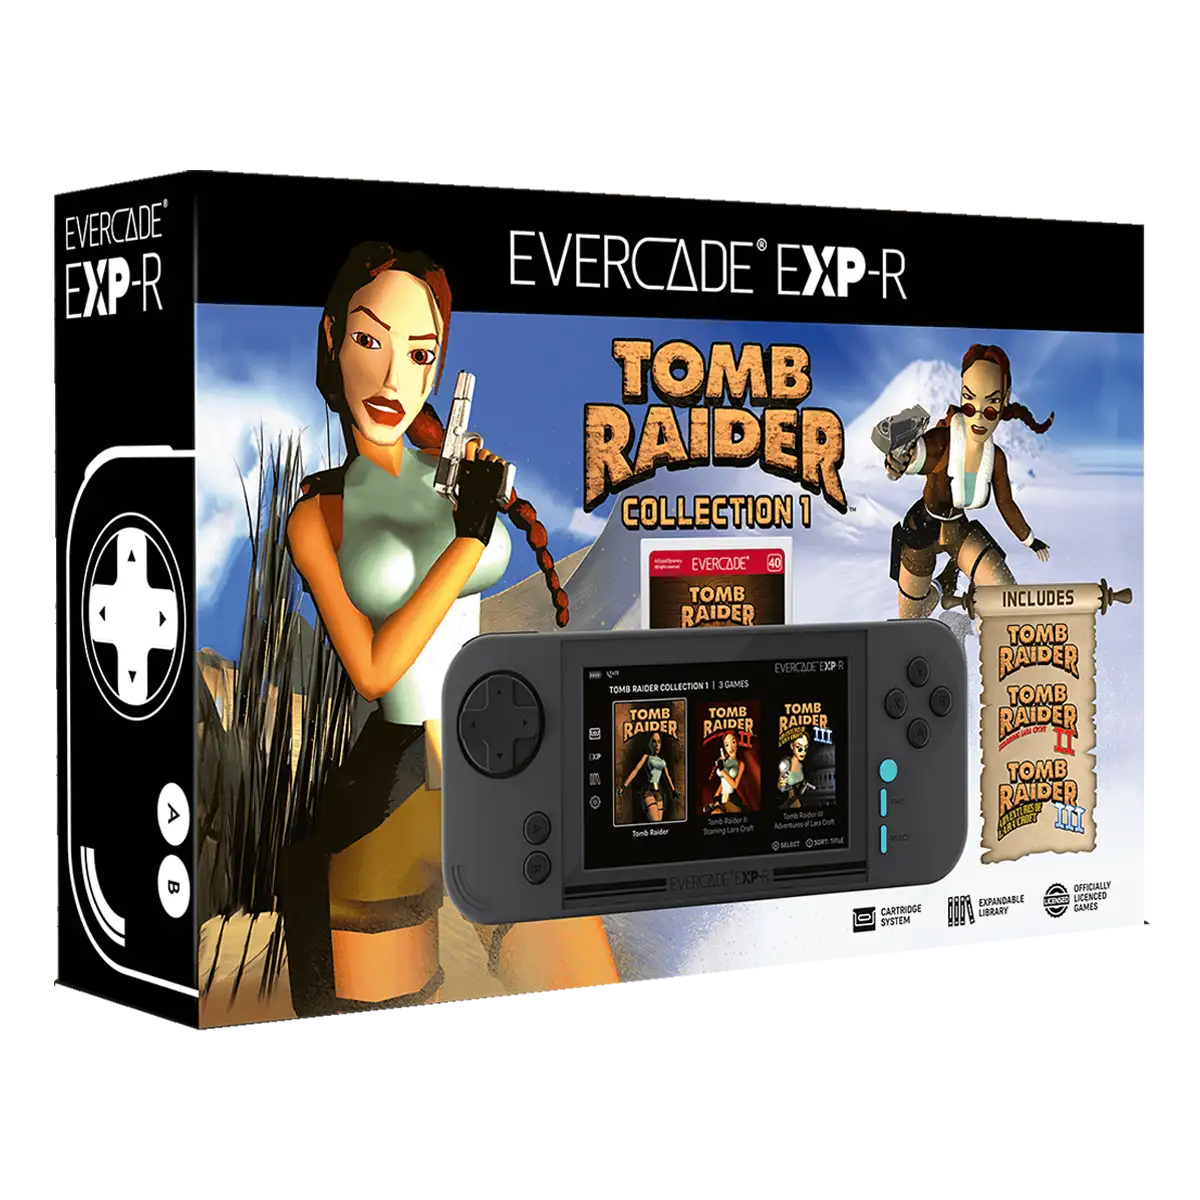 Evercade EXP-R + Tomb Raider Collection 1 Cover